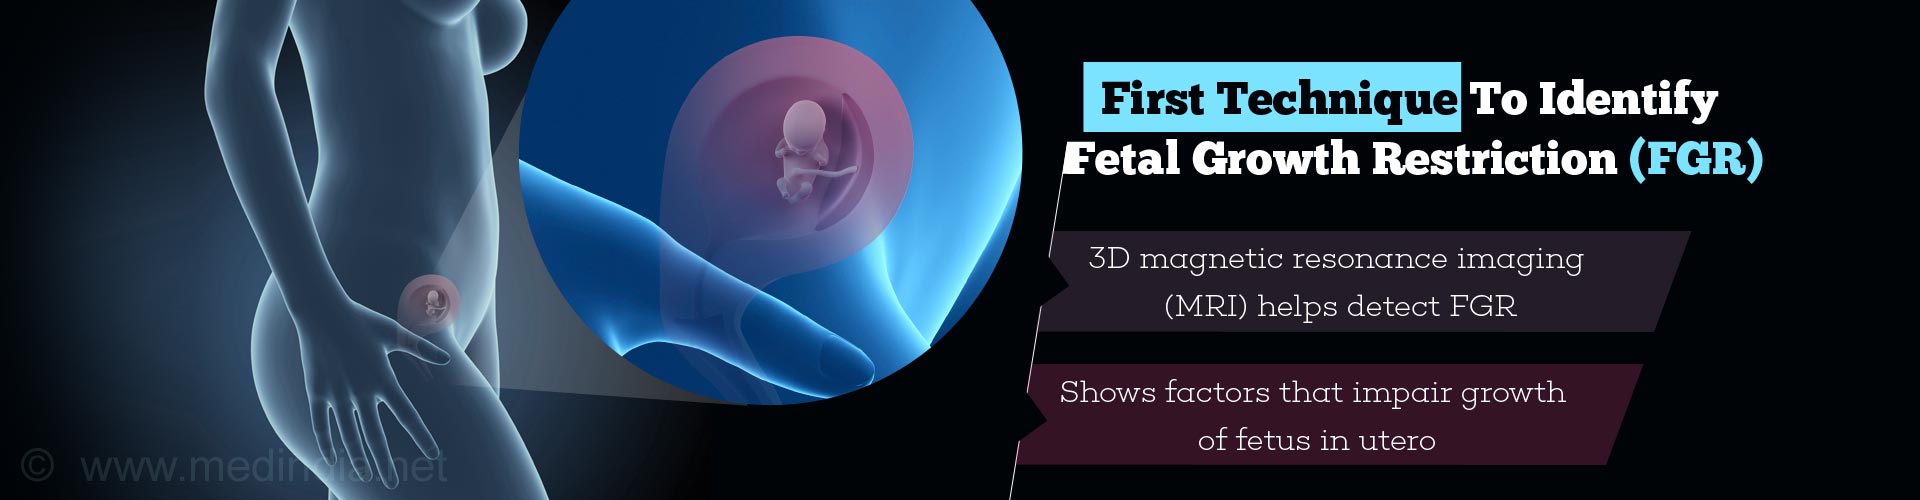 first technique to identify fetal growth restriction (fgr)
- 3D magnetic resonance imaging (MRI) helps detect FGR
- shows factors that impair growth of fetus in utero